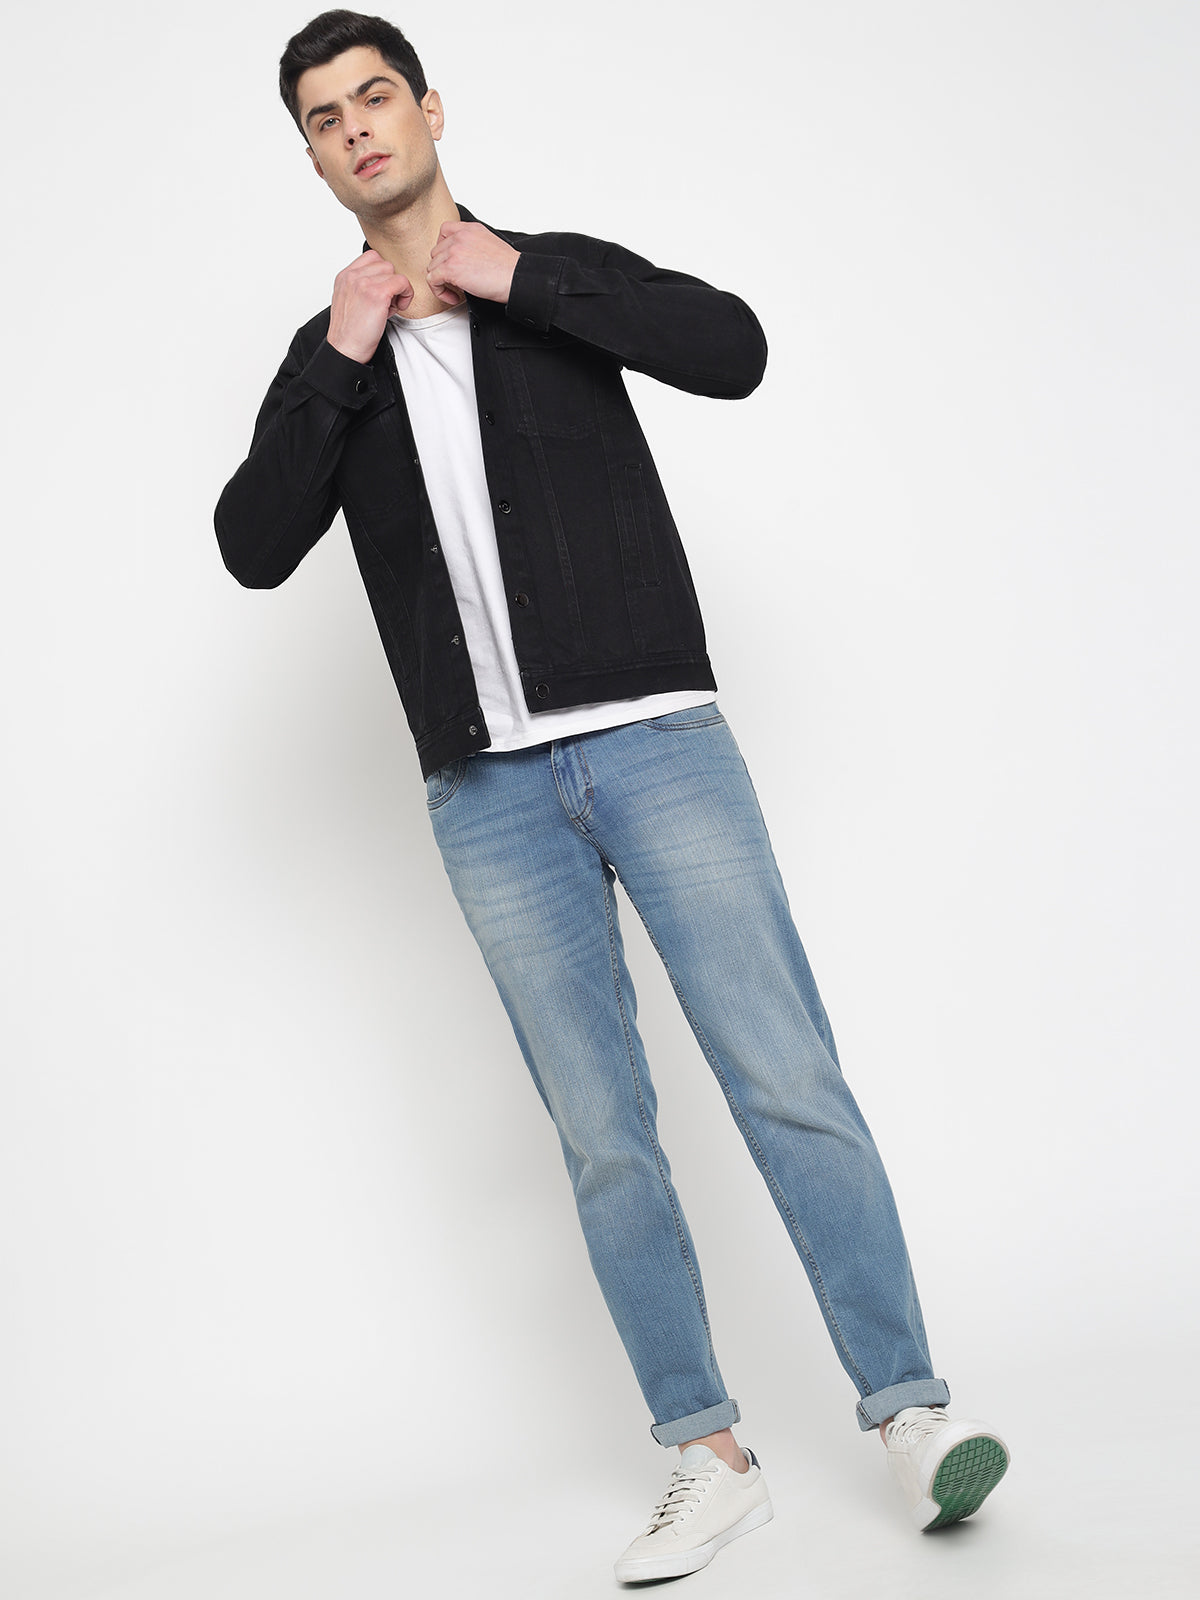 Blue Denim Jacket with Black Jeans Outfit | The Adult Man